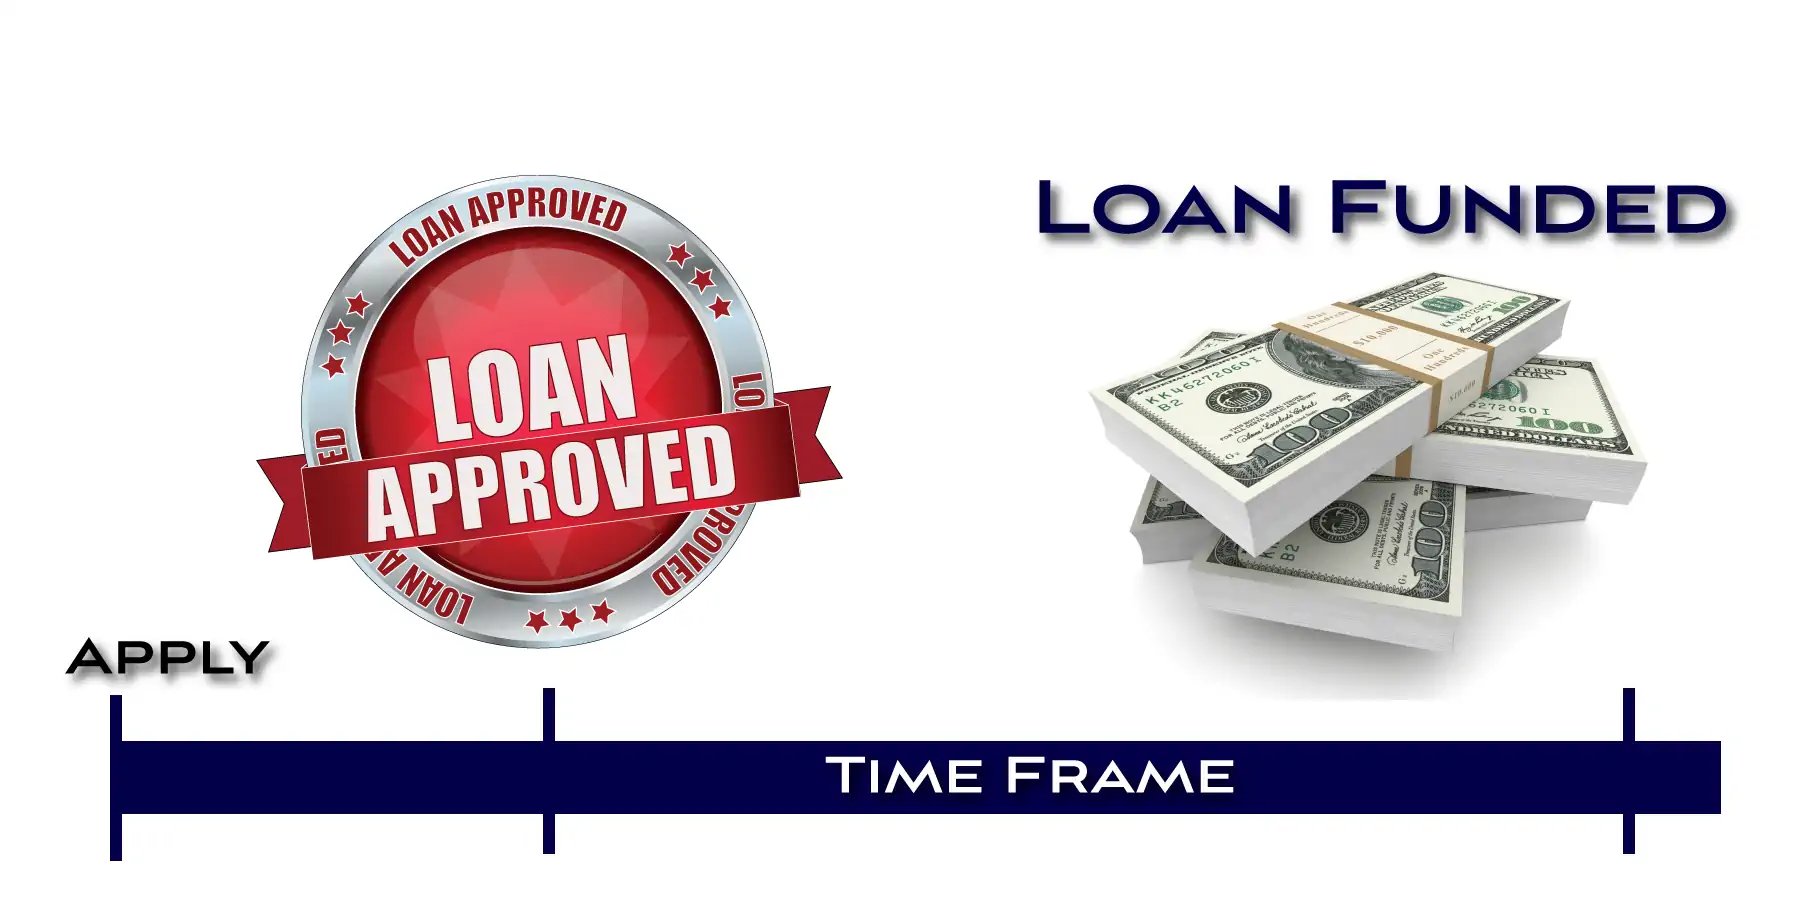 Title loan approval and funding times are different